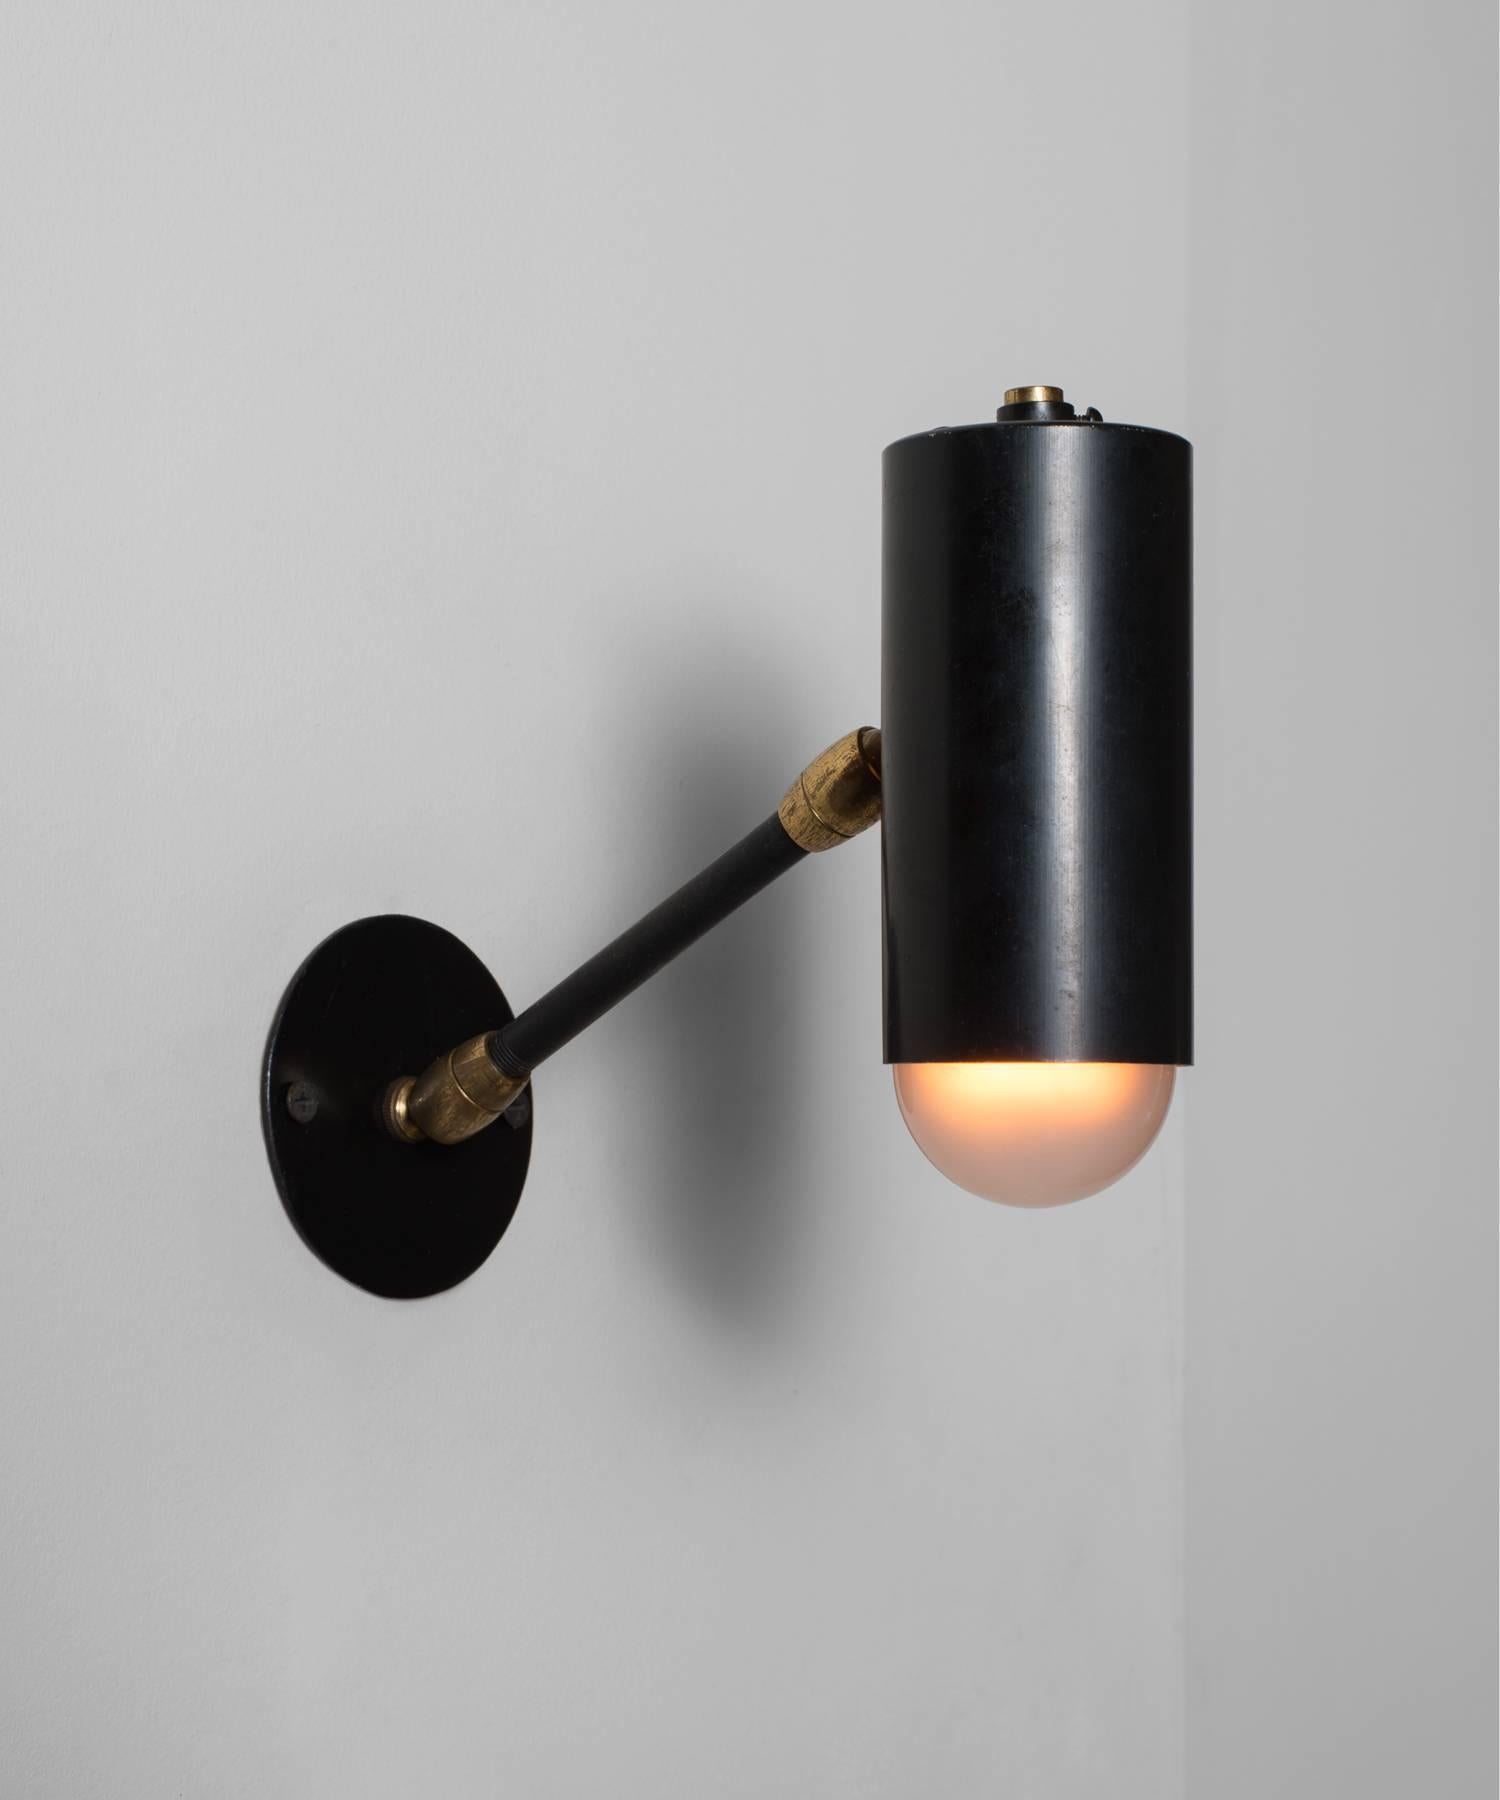 Black metal and brass petite modern sconce, circa 1950.

Metal construction with brass hardware and adjustable arm.